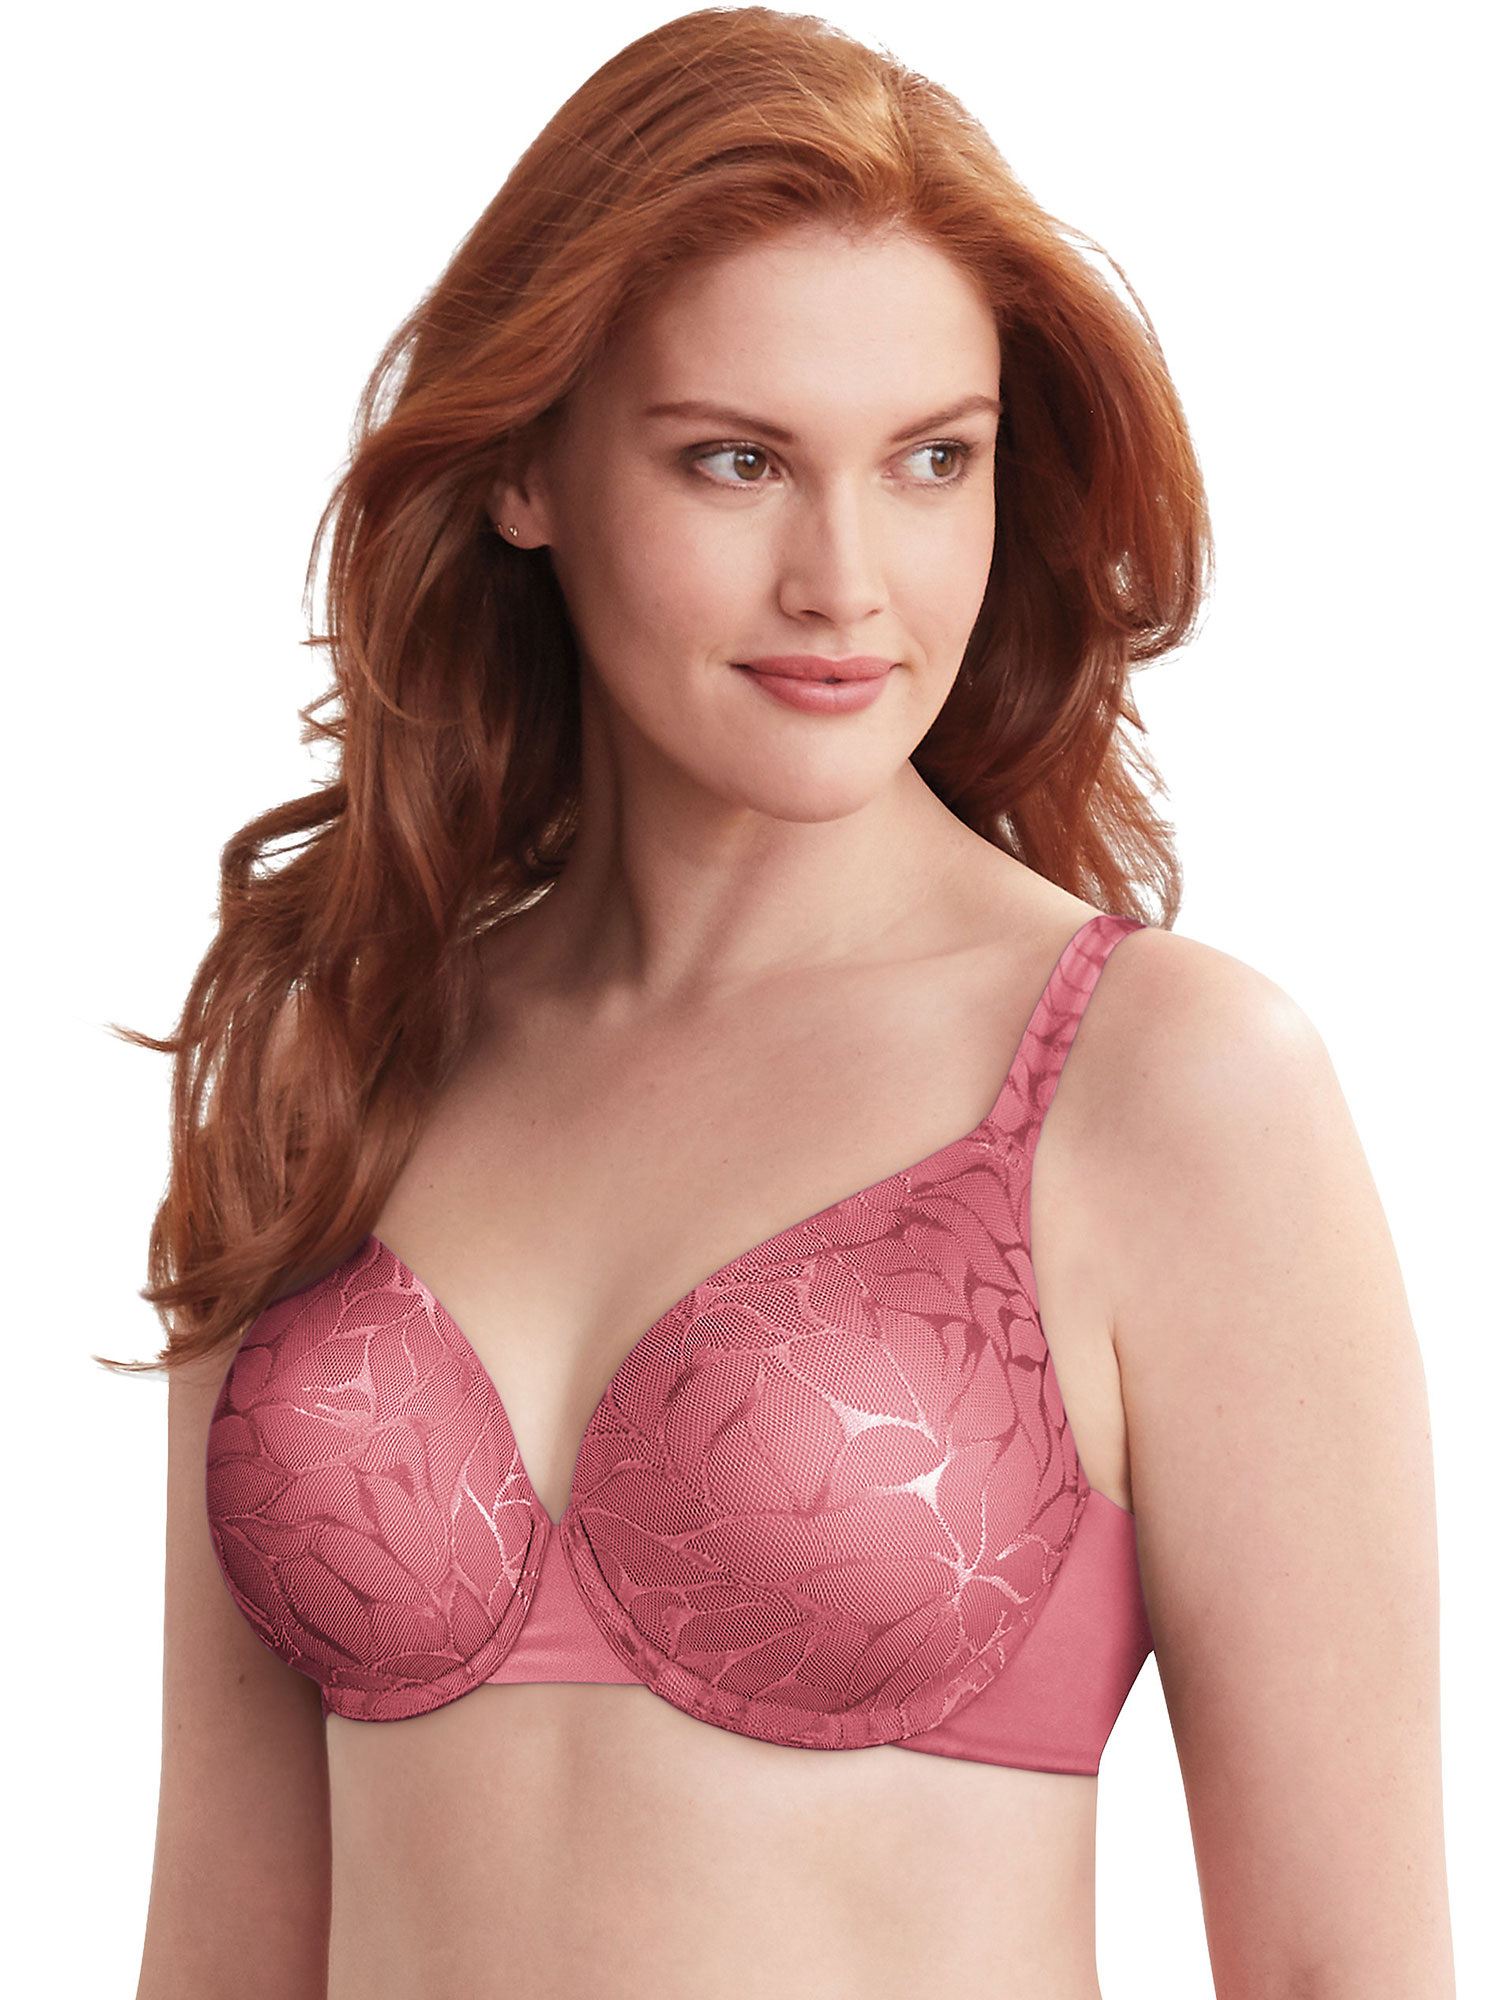 Bali Beauty Lift® Invisible Support Underwire Bra Terracotta Pink Lace 38C Women's - image 1 of 2